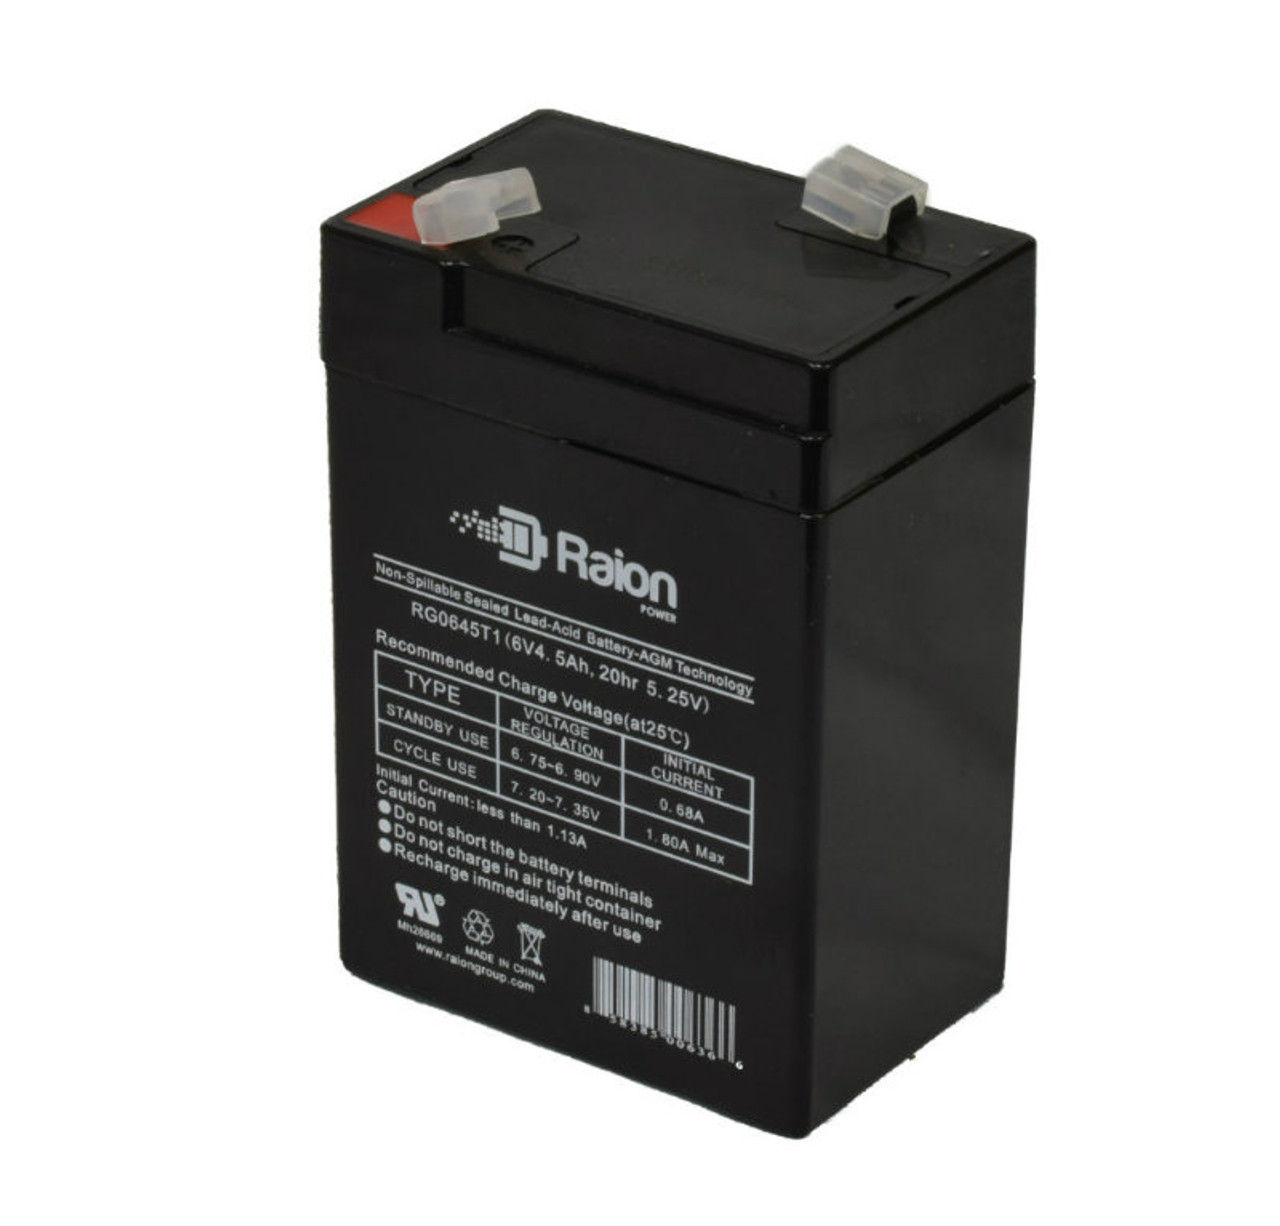 Raion Power RG0645T1 6V 4.5Ah Replacement Battery Cartridge for Lithonia H2M